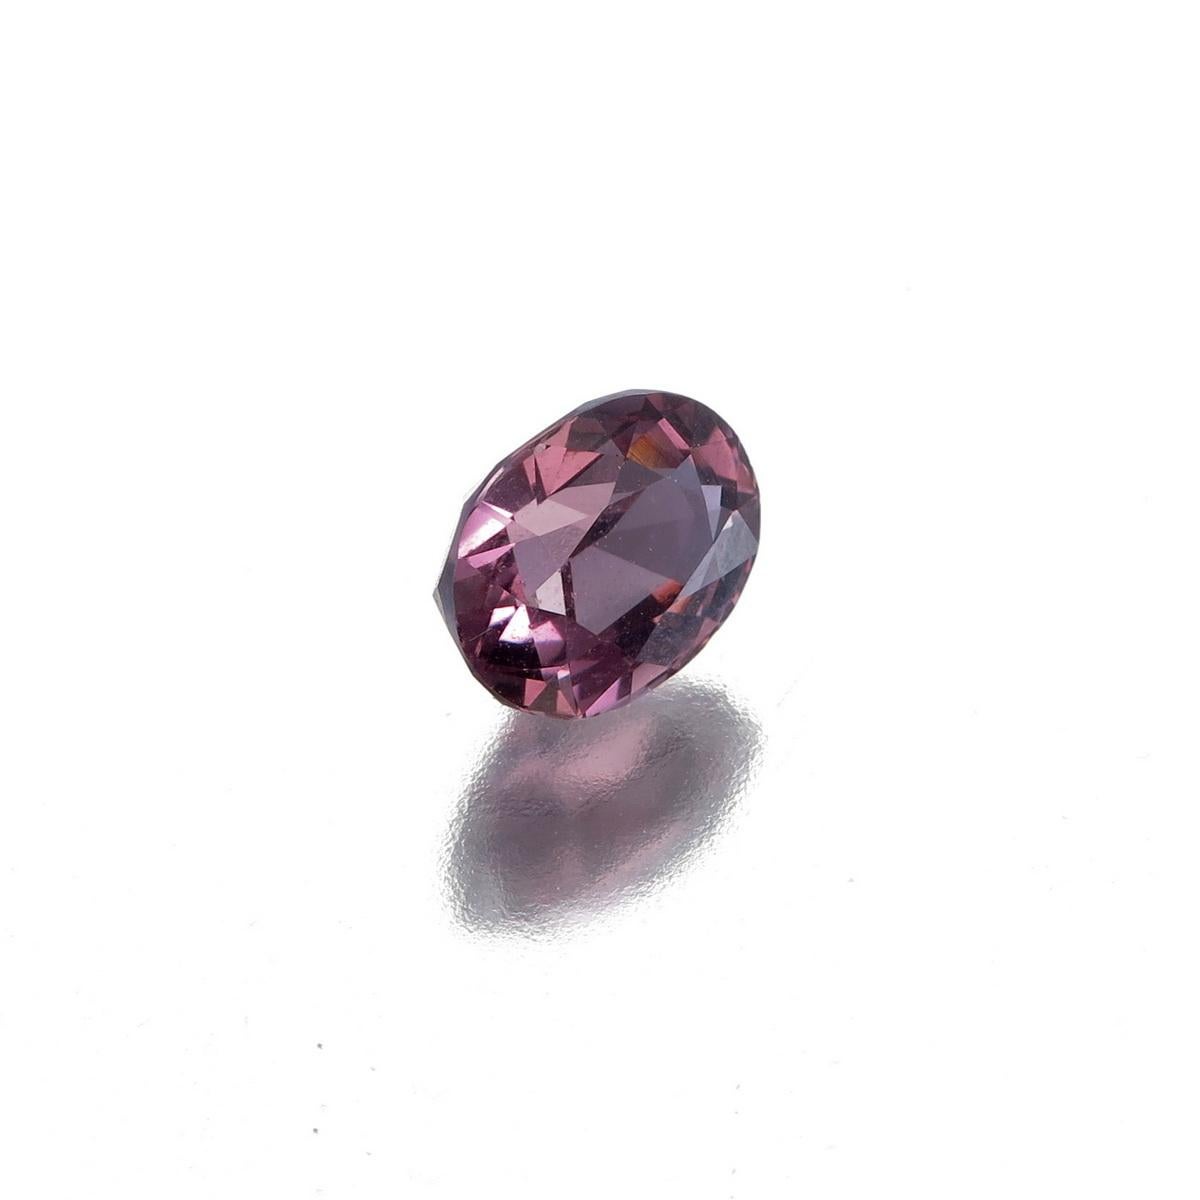 Lovely sparkling 1.63 Carat Natural Vivid Pink Spinel from Burma 
Dimension: 7.61 x 5.82 x 4.72 mm
Weight: 1.63 Carat
Shape: Oval Faceted Cut
No treatment No Heat
Comes with certificate from Gemological International Laboratories Canada No: